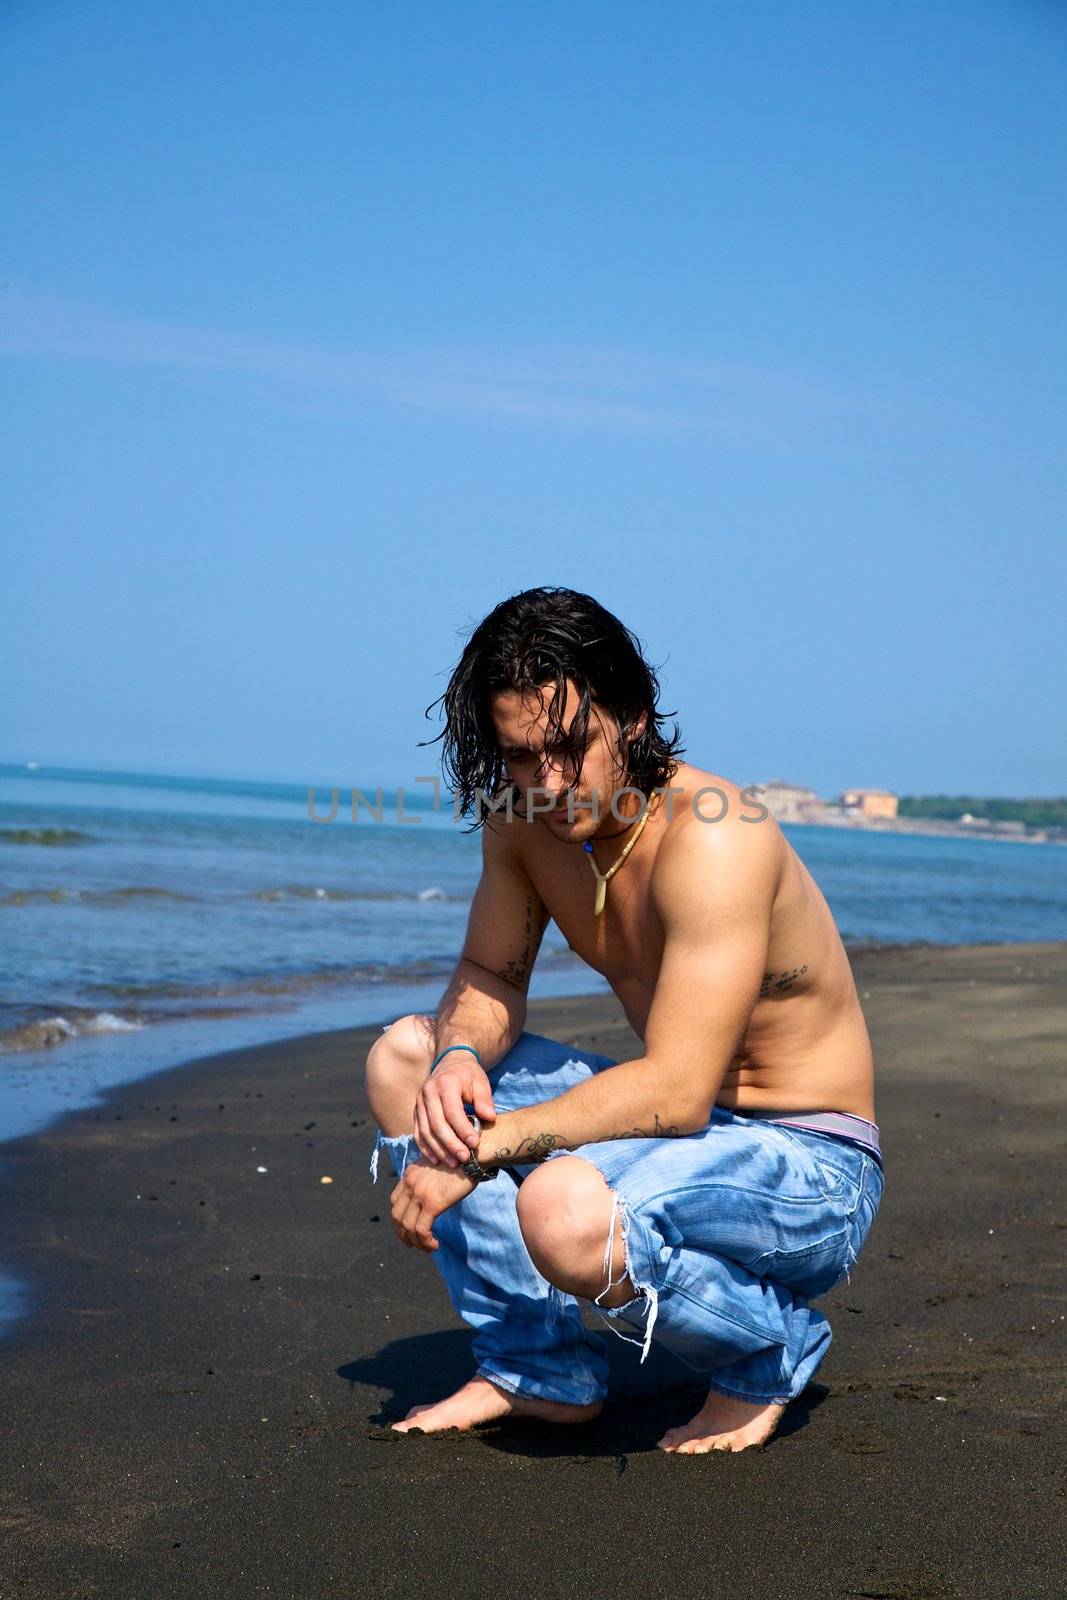 Fashion model male on the beach relaxing and thinking